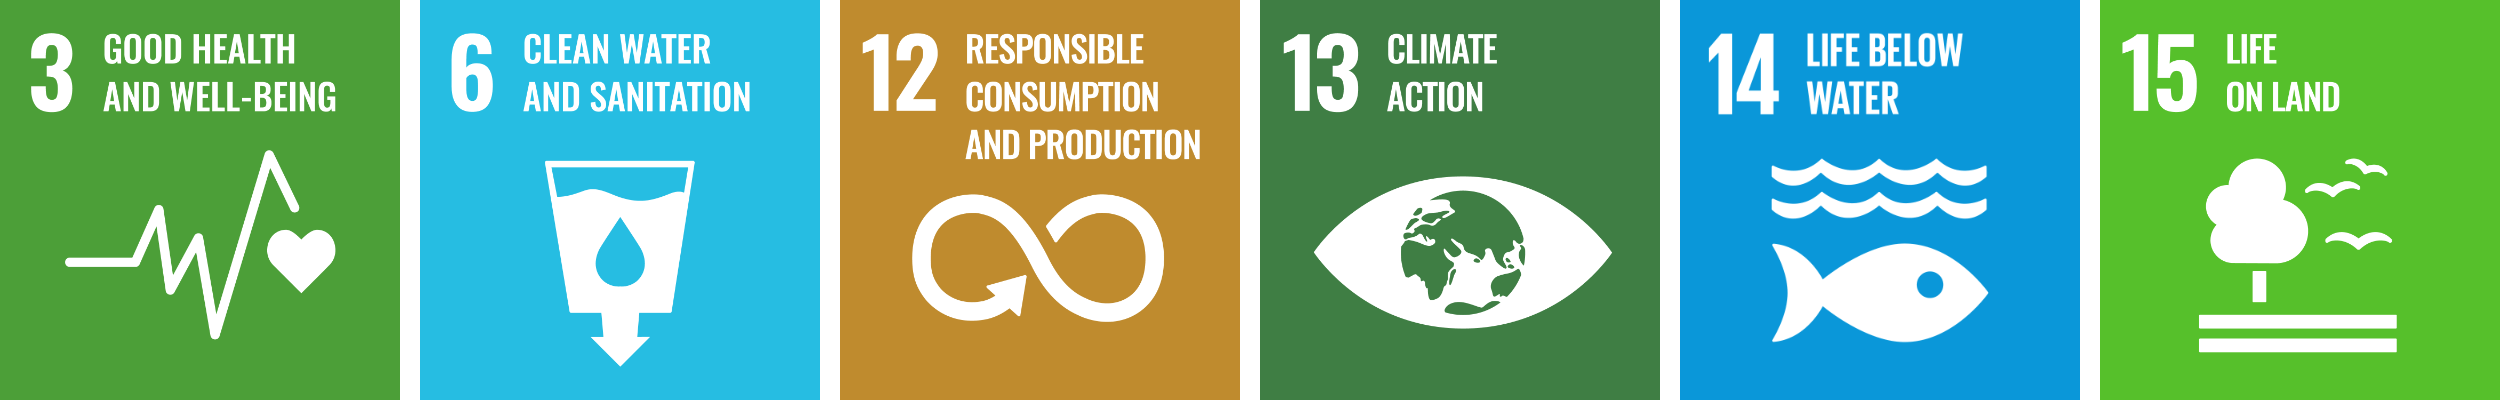 Image displaying the Sustainable Development Goals (SDGs) 3, 6, 12, 13, 14, and 15